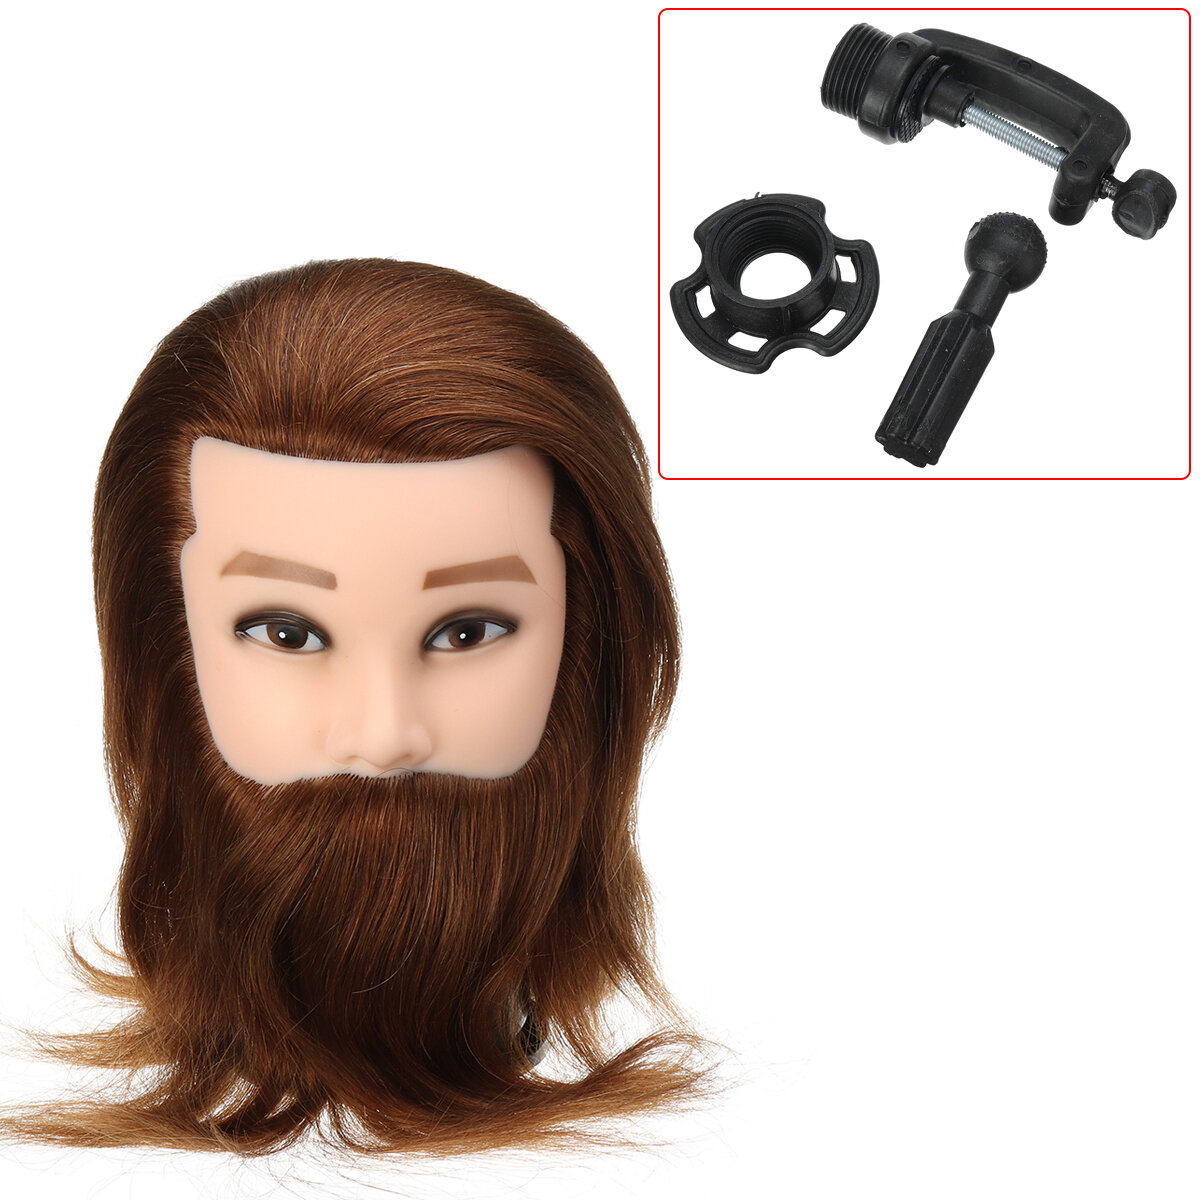 CosmetologyMannequin Head with Hair for Braiding Cornrow Practice Head Training Mannequin Dummy Heads